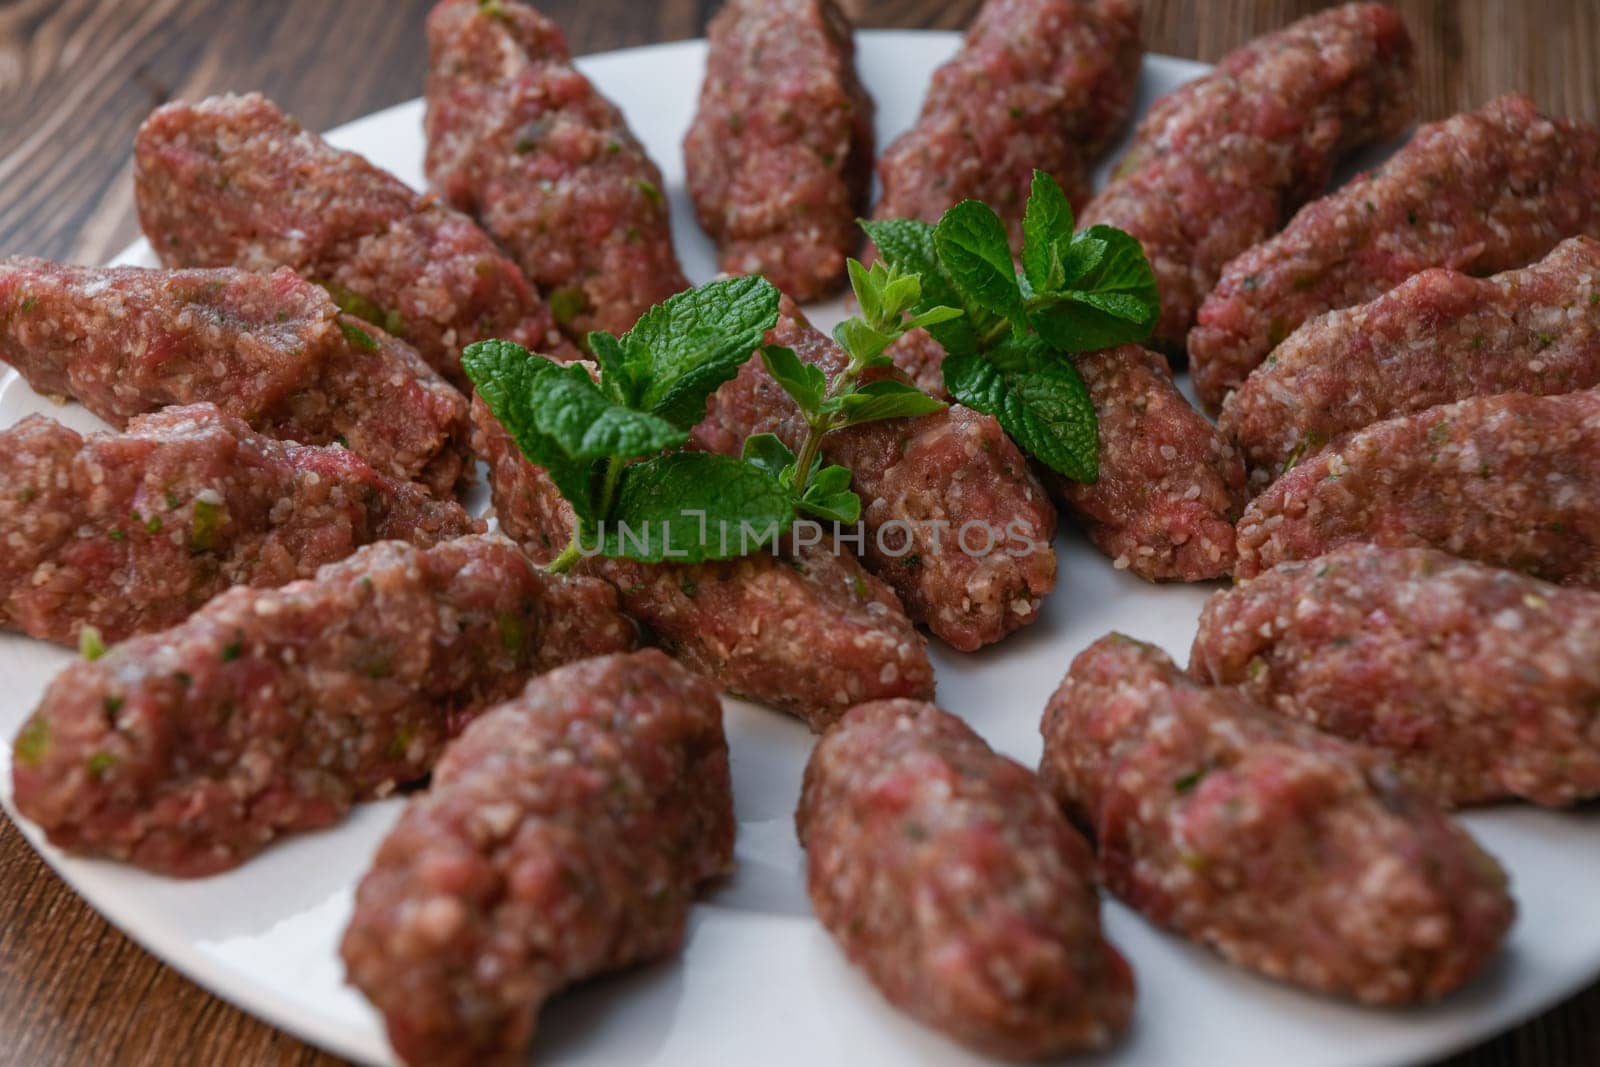 RECIPE FOR LEBANESE KEBBE NAYYHE, RAW MINCED BEEF, MARJORAM, MINT, ONIONS, CRUSHED WHEAT, SEVEN SPICES, CINNAMON, CAYENNE PEPPER. High quality photo